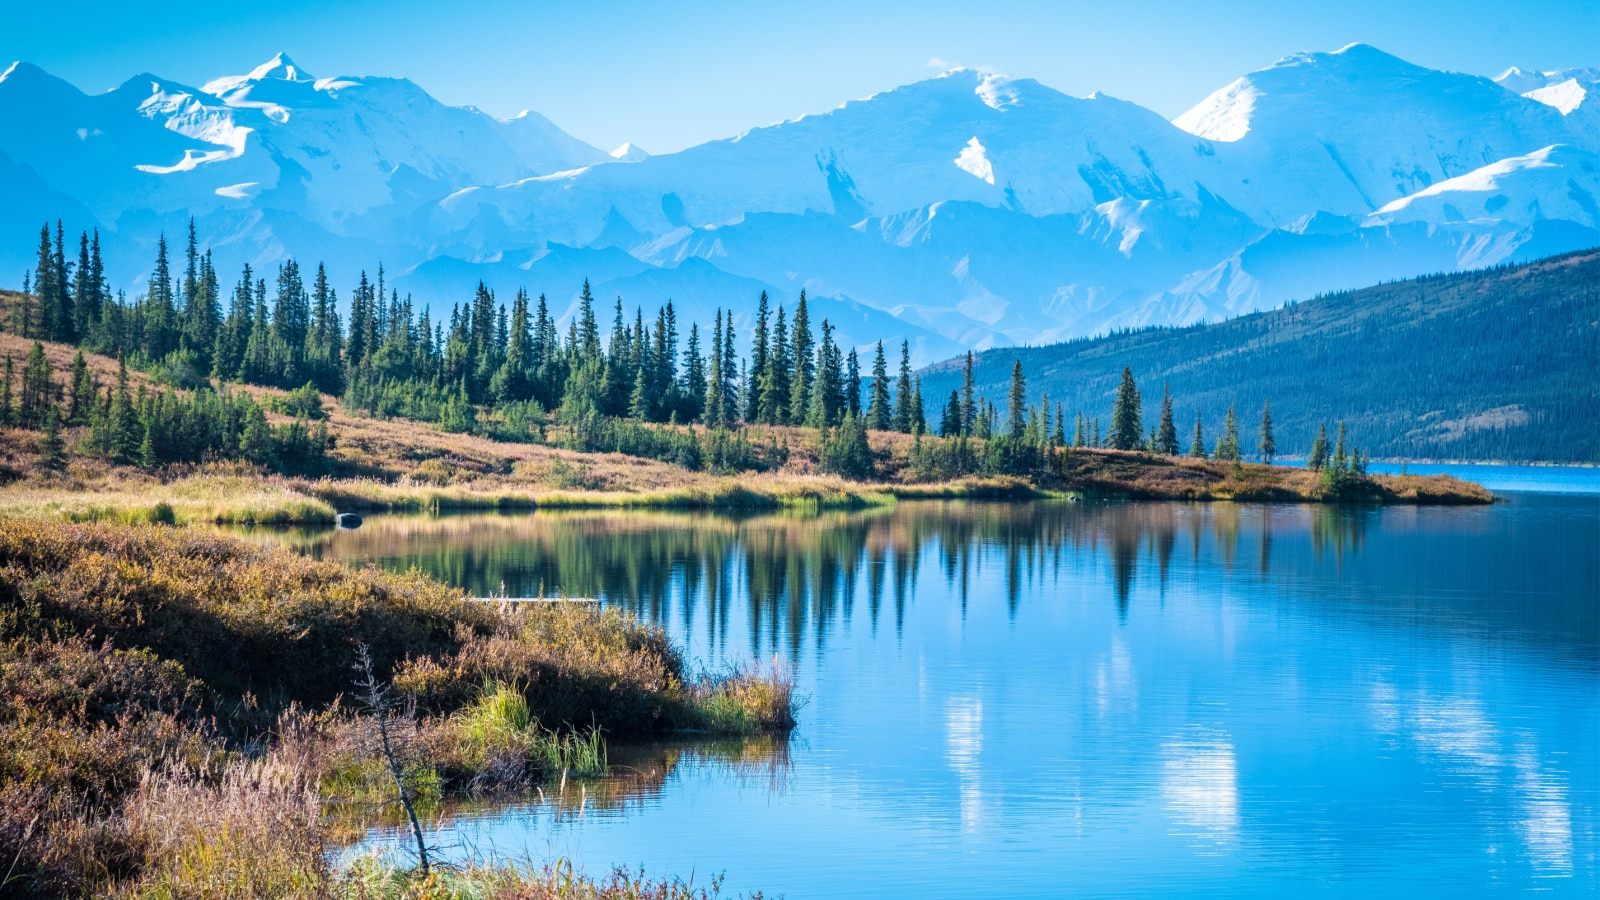 <p>Situated in central Alaska, this vast park encompasses six million acres of wilderness, including North America’s highest peak, Denali (formerly known as Mount McKinley). Visitors can explore diverse landscapes, from tundra to taiga, and might spot iconic wildlife such as grizzly bears, wolves, and moose.</p>